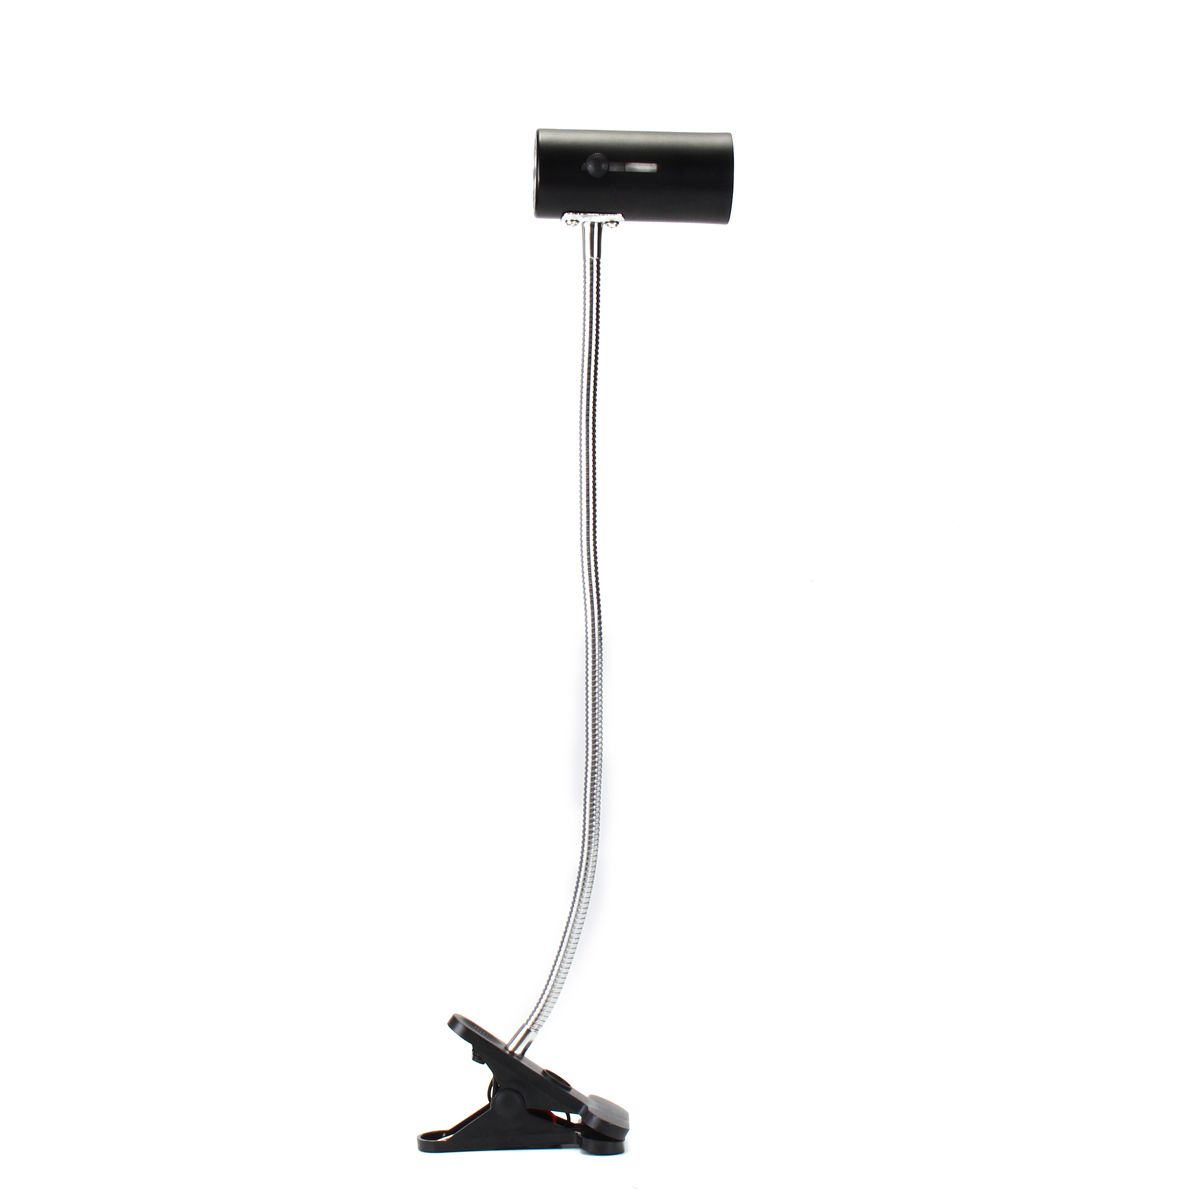 40CM-E27-Flexible-Reptile-LED-Light-Lamp-Holder-Bulb-Adapter-Socket-with-Clip-On-Switch-for-Pet-1402843